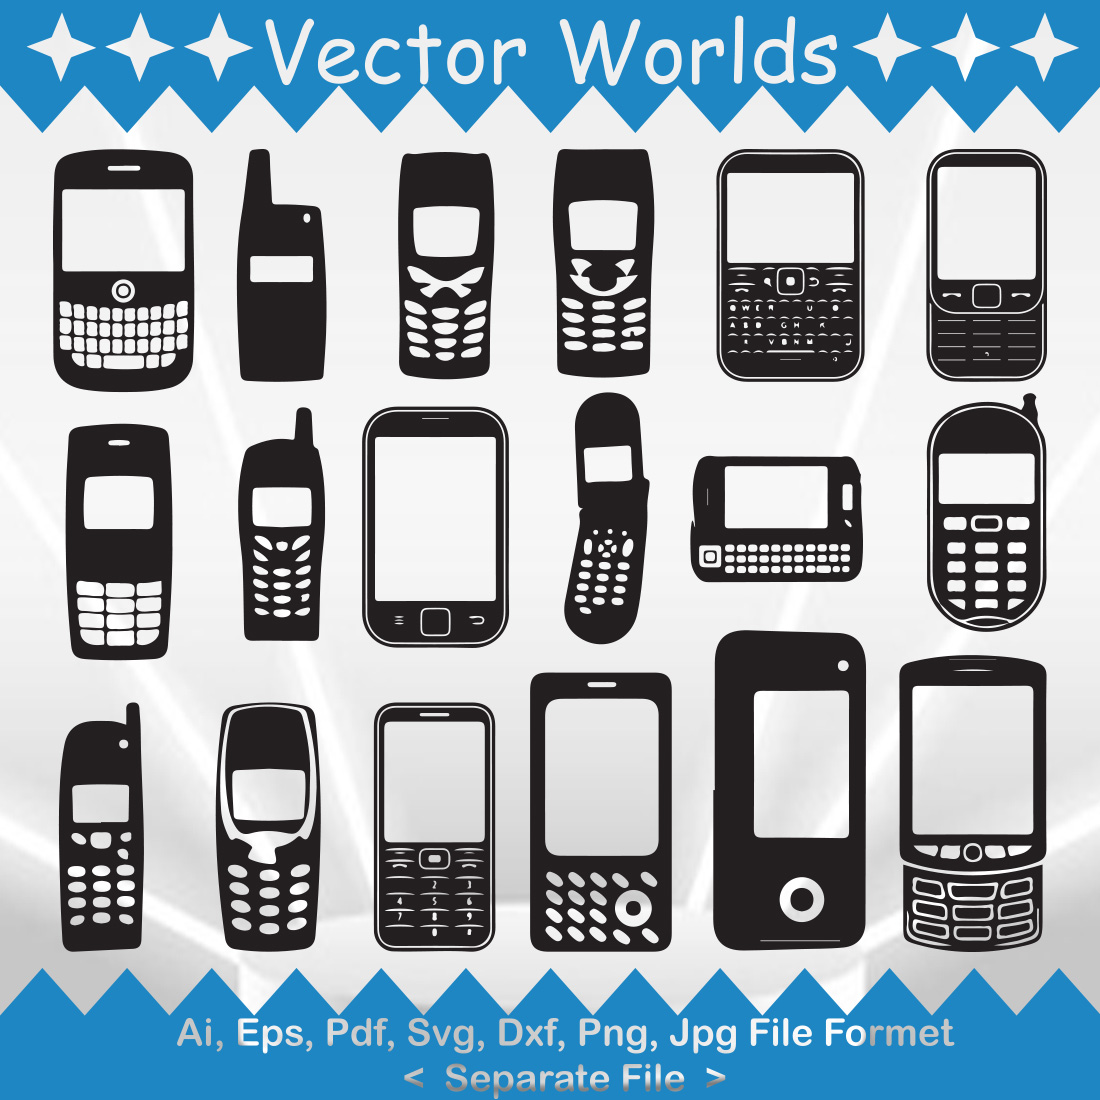 A selection of vector wonderful images of silhouettes of button phones.